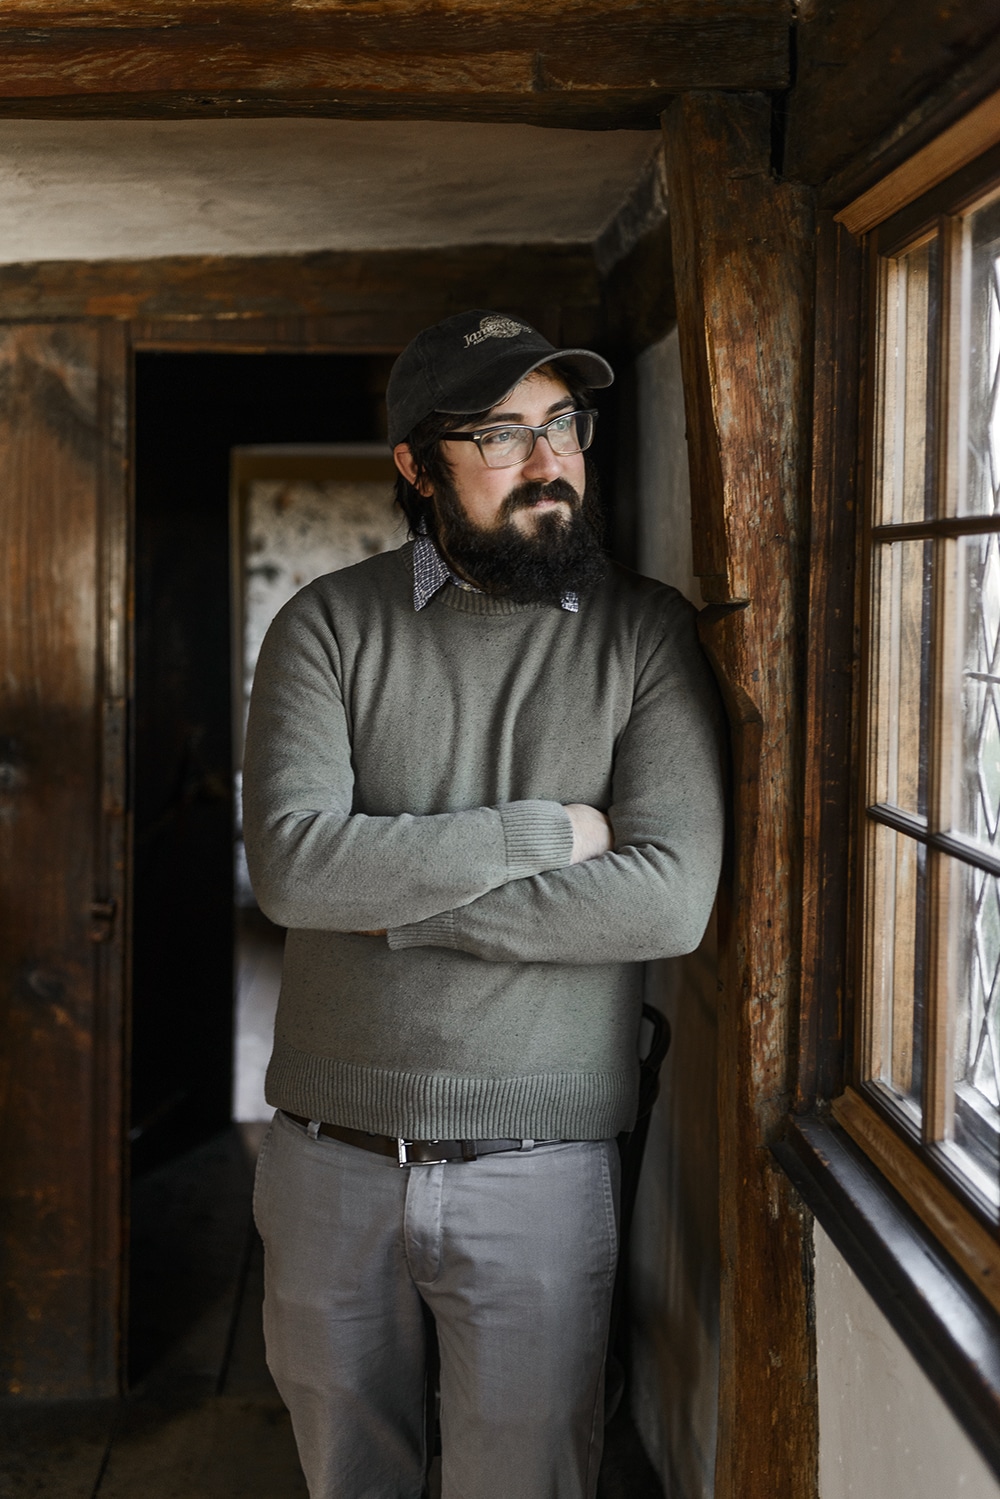 Ryan Conary in the Hooper-Hathaway House at the House of Seven Gables campus. Ryan is on the administrative staff at the house and is co-founder of the Salem Historical Society.